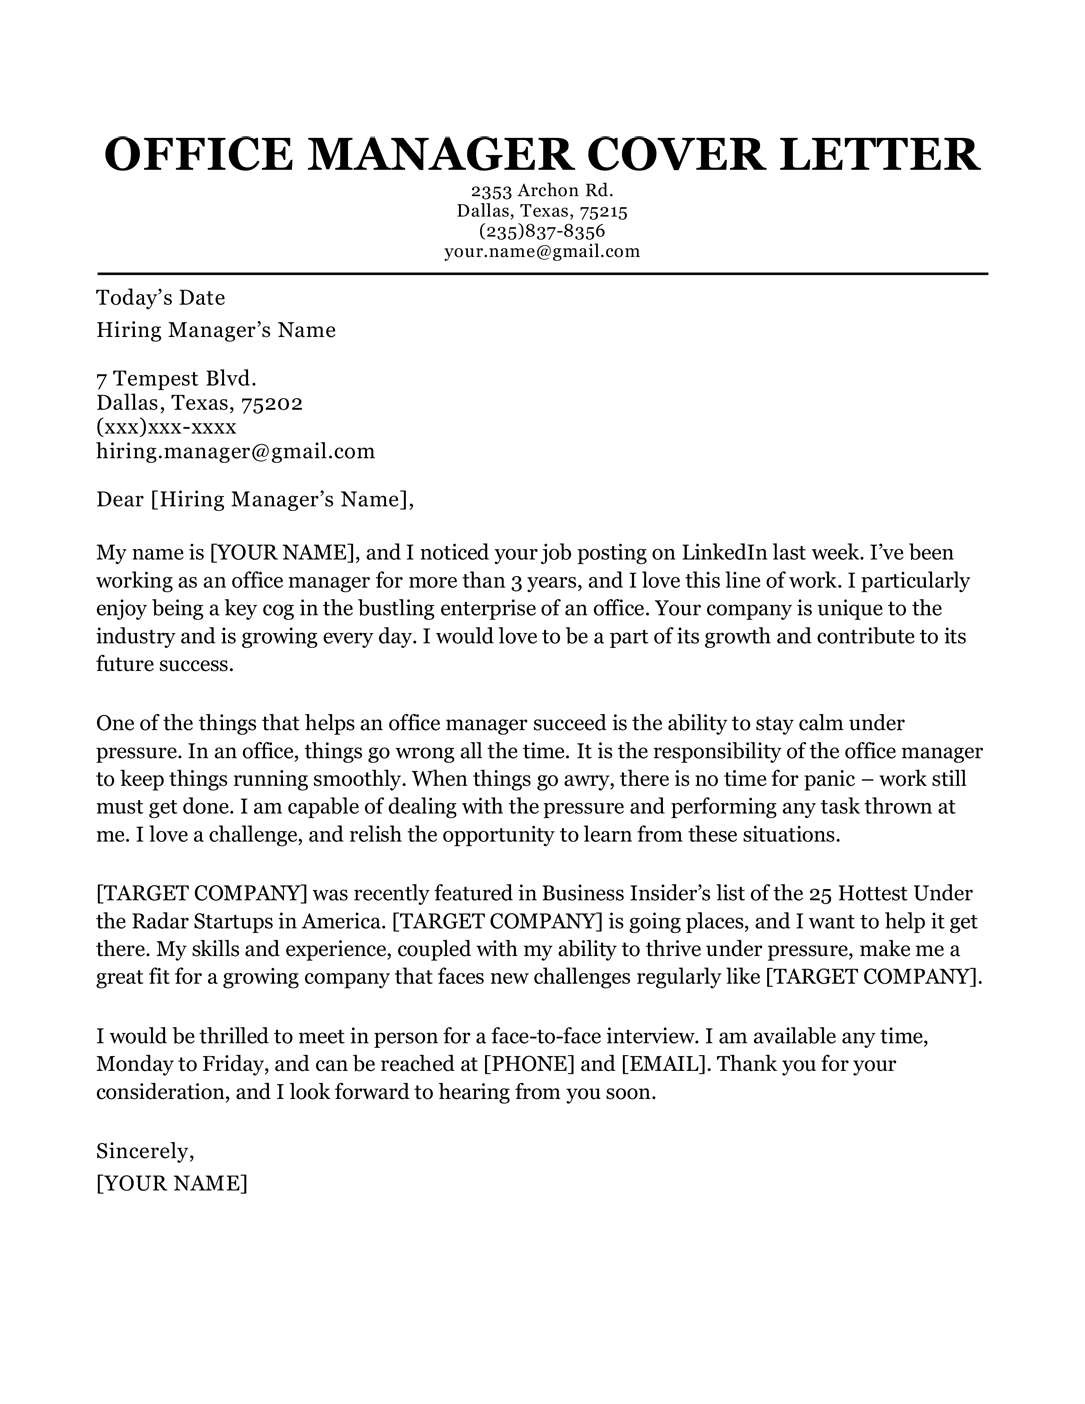 Letter To Recruiter Sample from resumecompanion.com